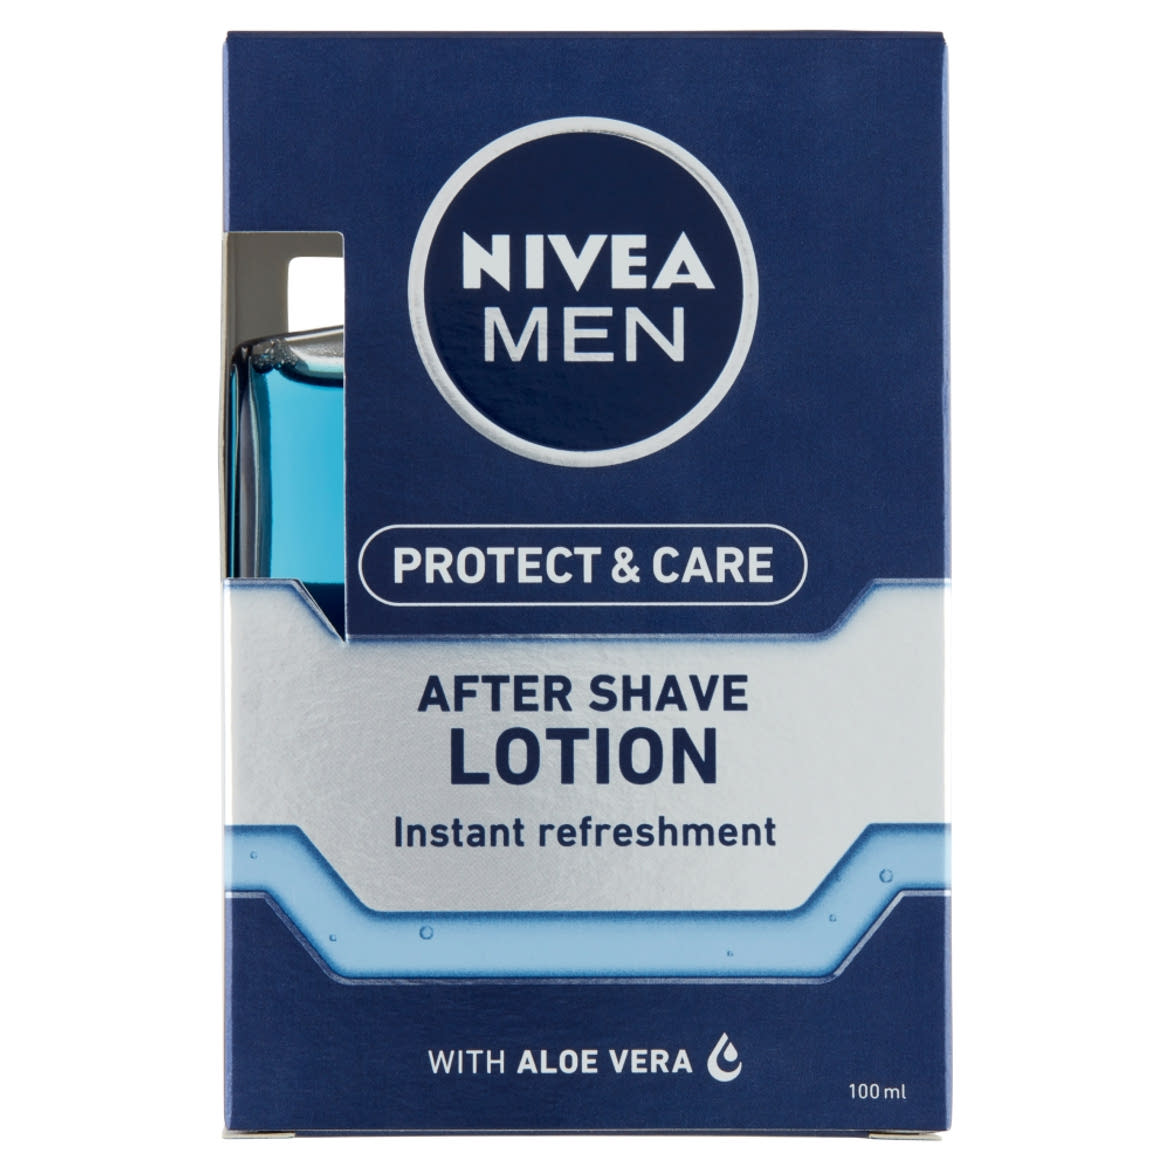 NIVEA MEN Protect & Care after shave lotion